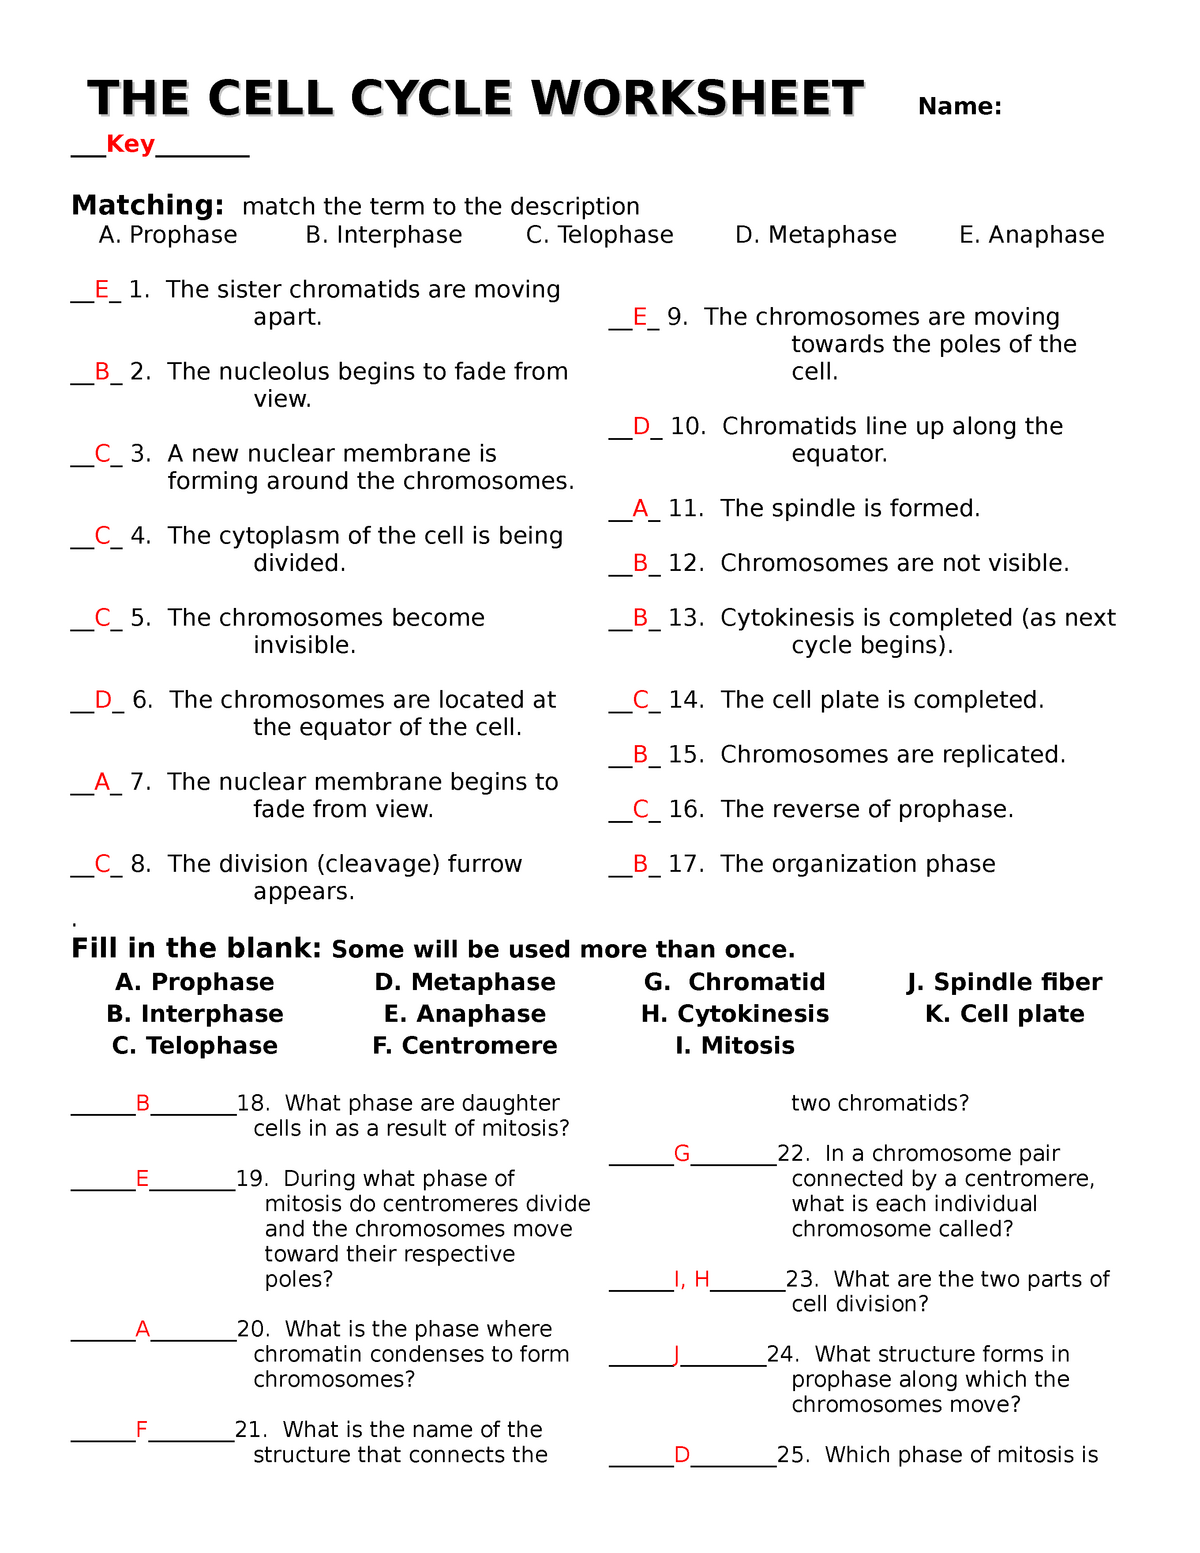 The-cell-cycle-worksheet with answers - StuDocu With Regard To Cell Division Worksheet Answers